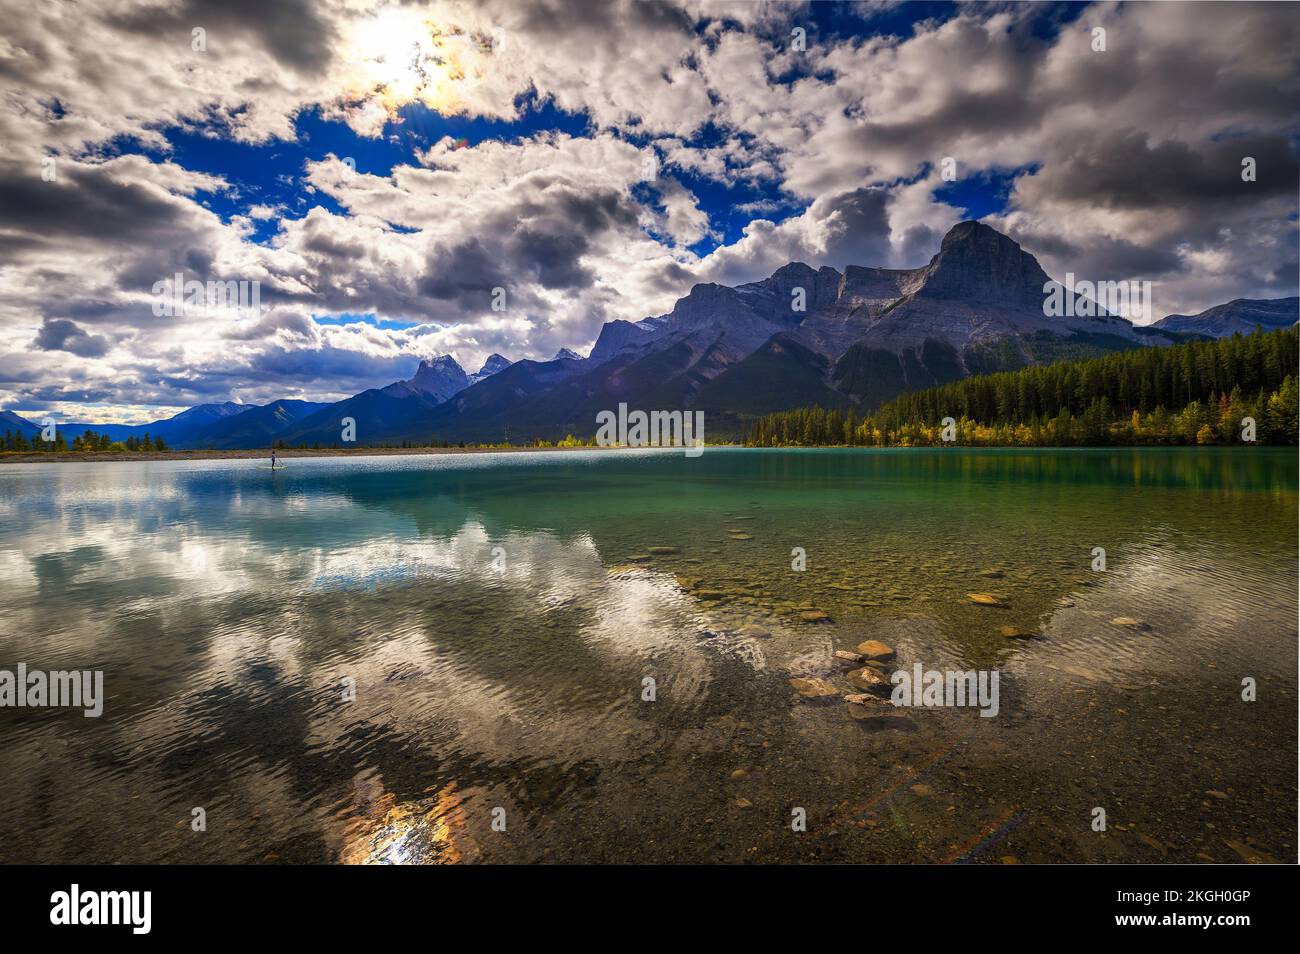 Rundle Forebay Reservoir with Rocky Mountains in Canmore, Canada Stock Photo